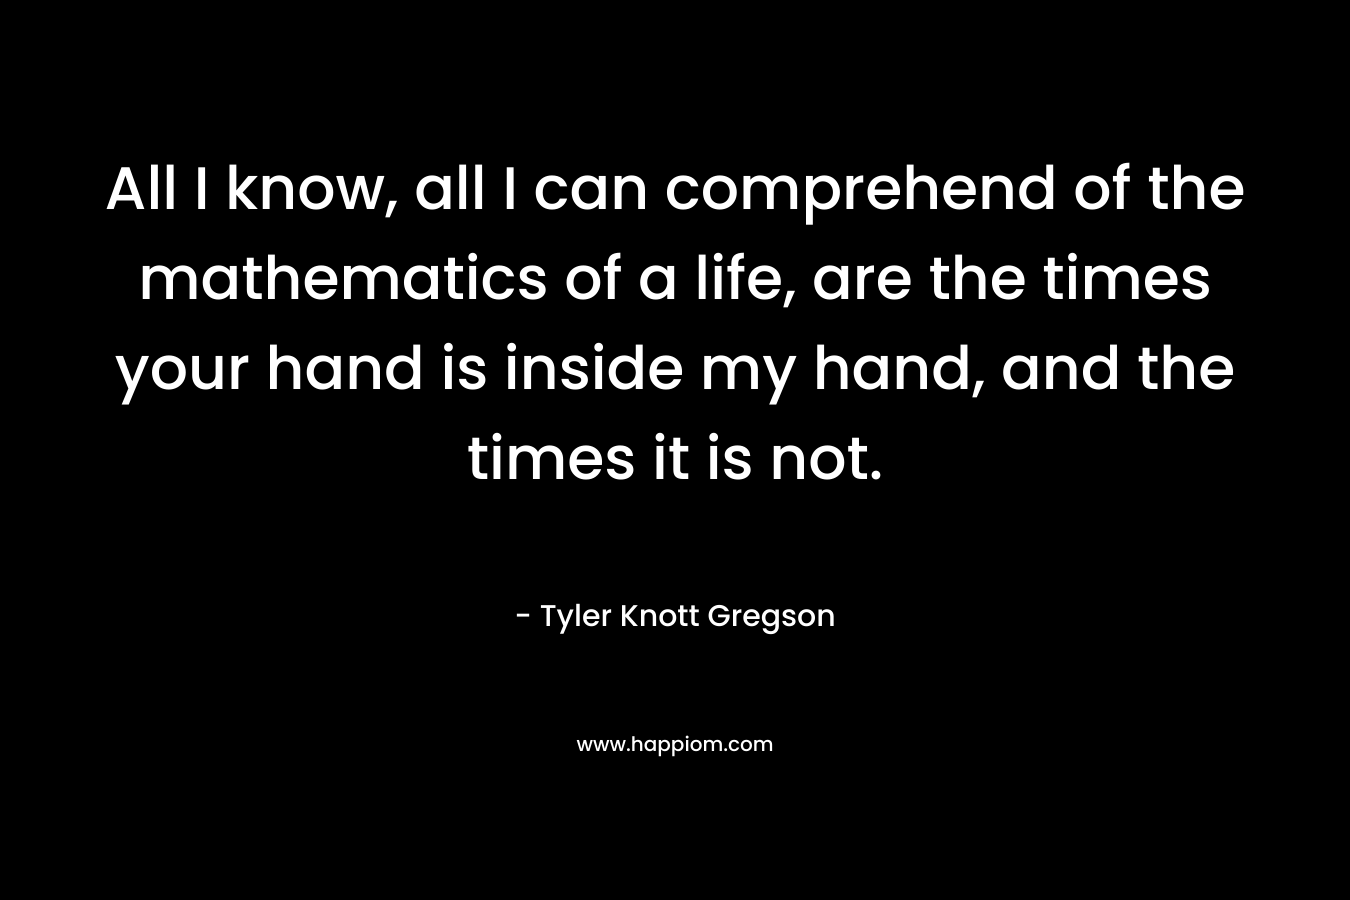 All I know, all I can comprehend of the mathematics of a life, are the times your hand is inside my hand, and the times it is not. – Tyler Knott Gregson